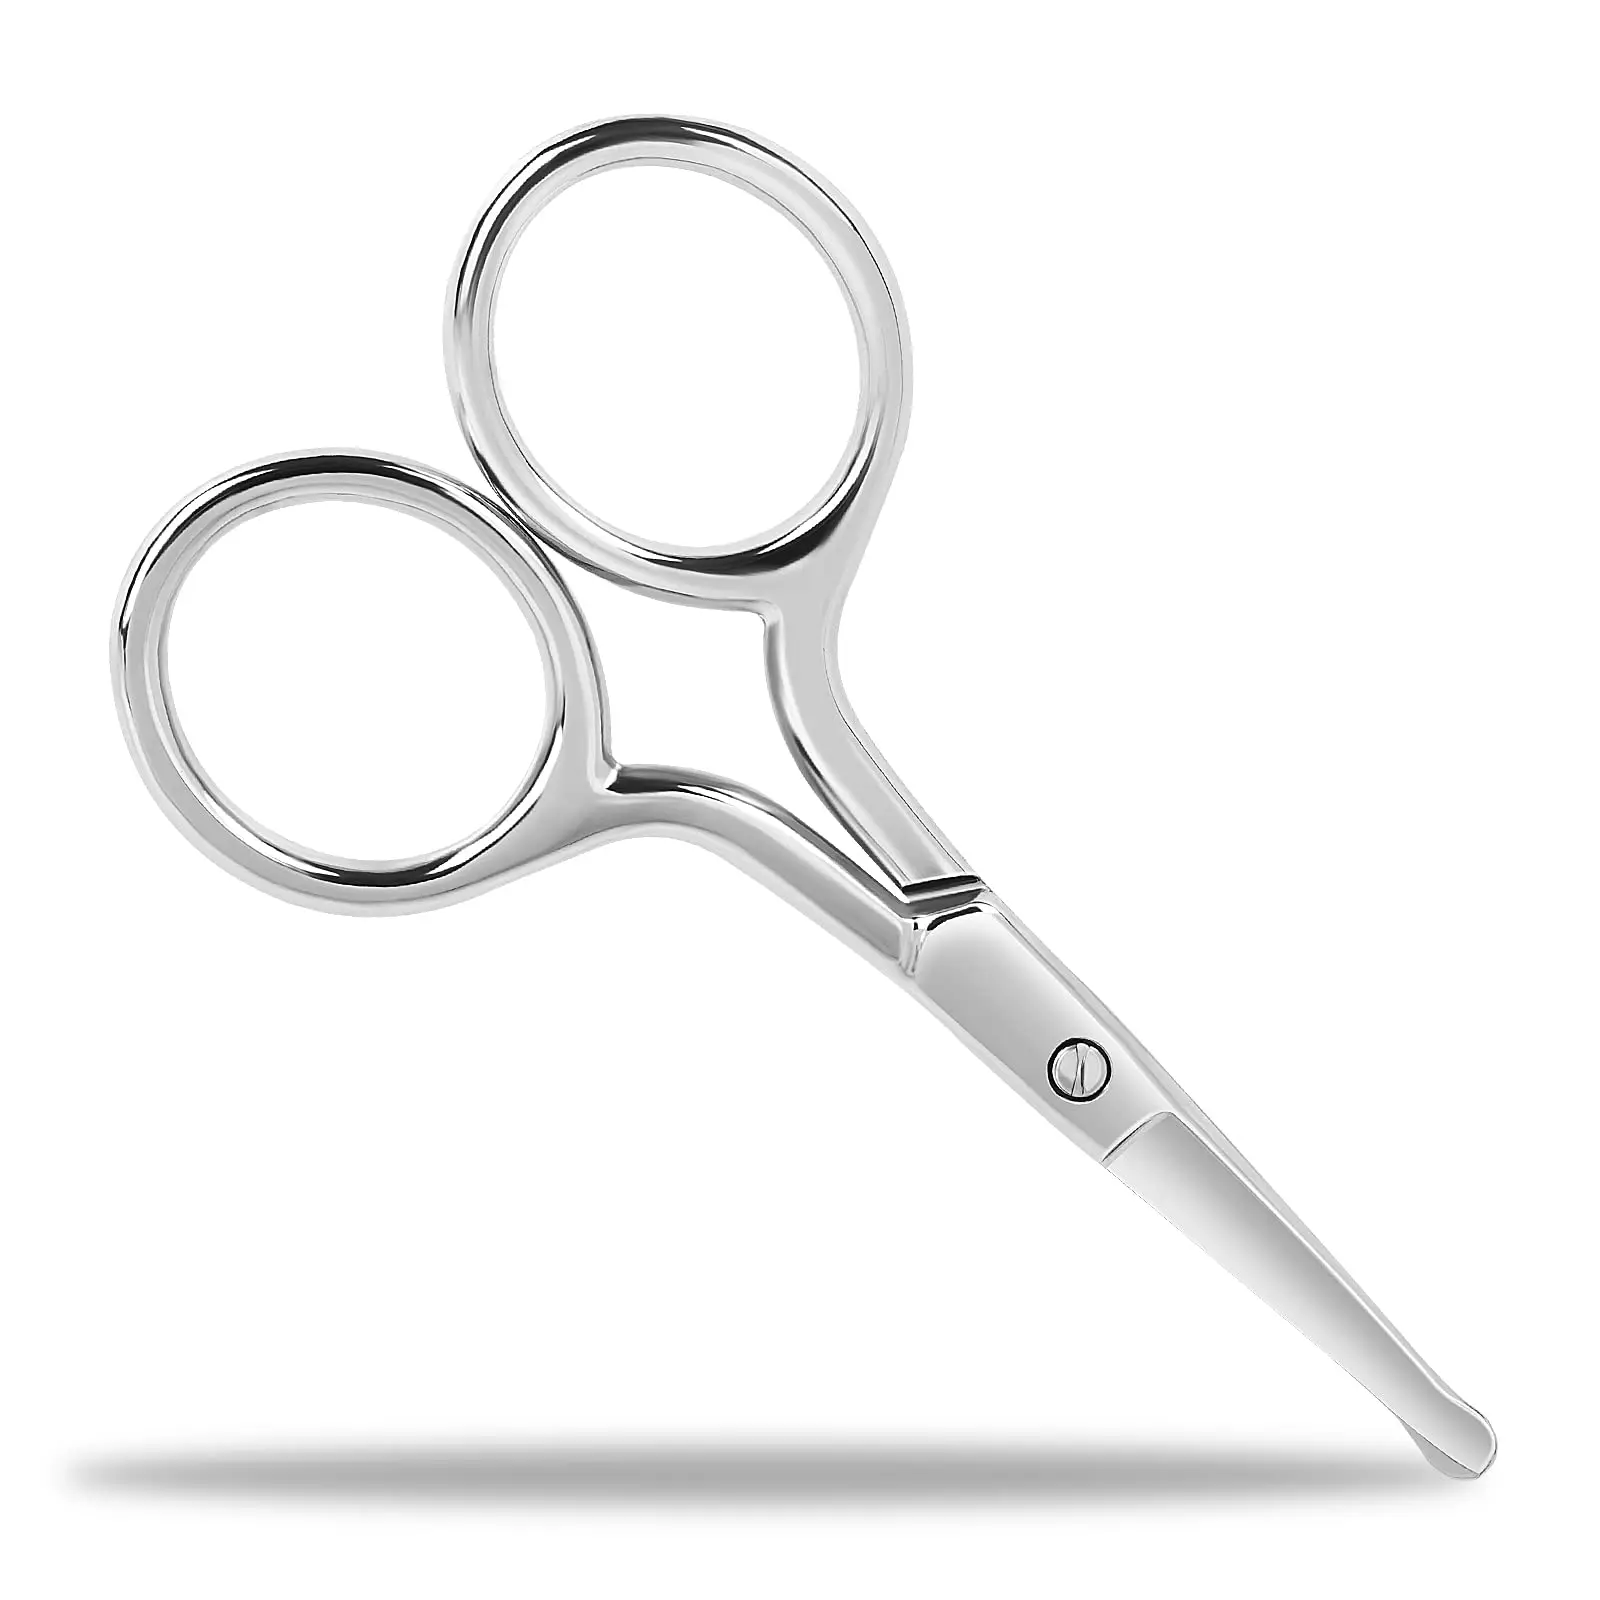 

Rounded Stainless Steel Facial Hair Scissors for Nose, Eyebrows, Facial Hair, Eyelashes, Moustache, Beard Trimming